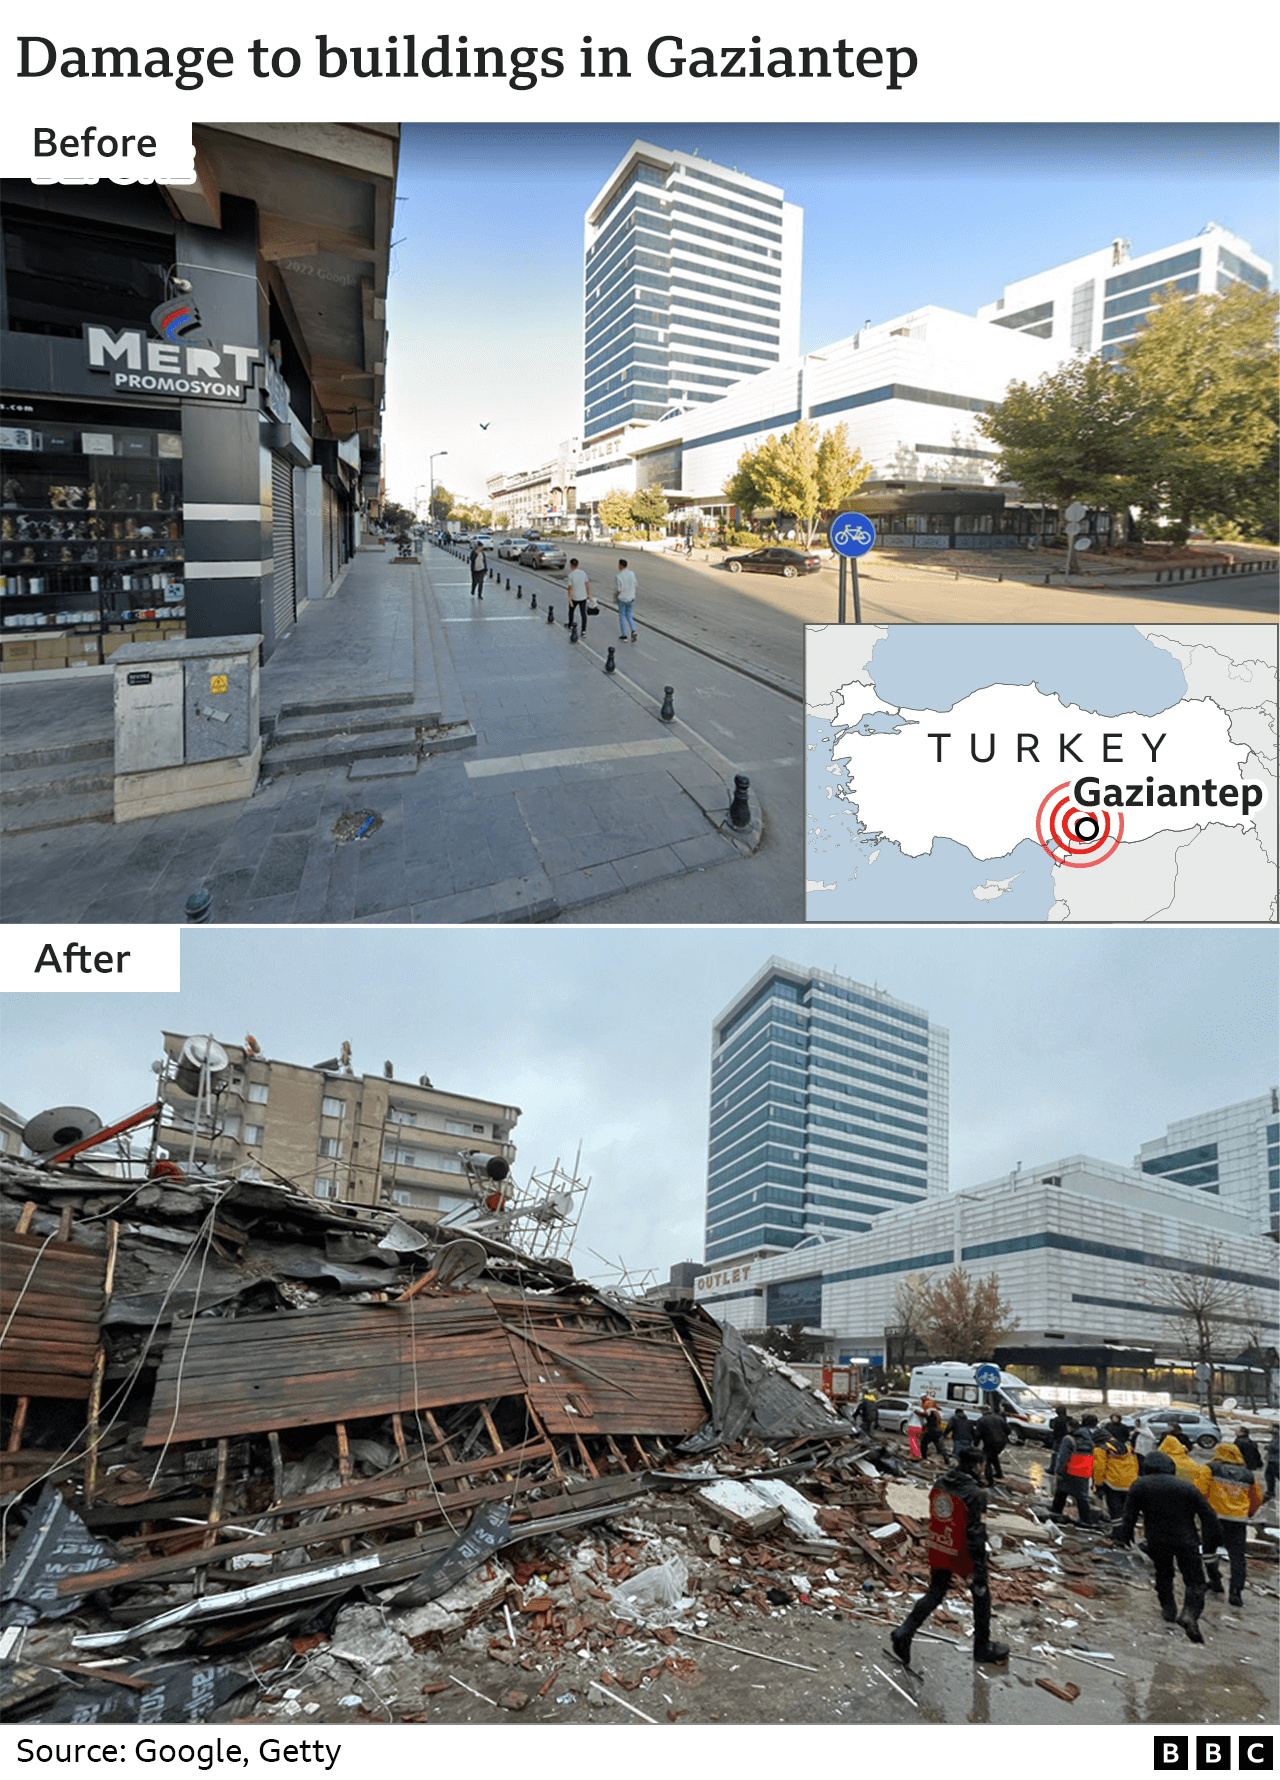 Before and after images showing collapsed buildings in Gaziantep, Turkey.